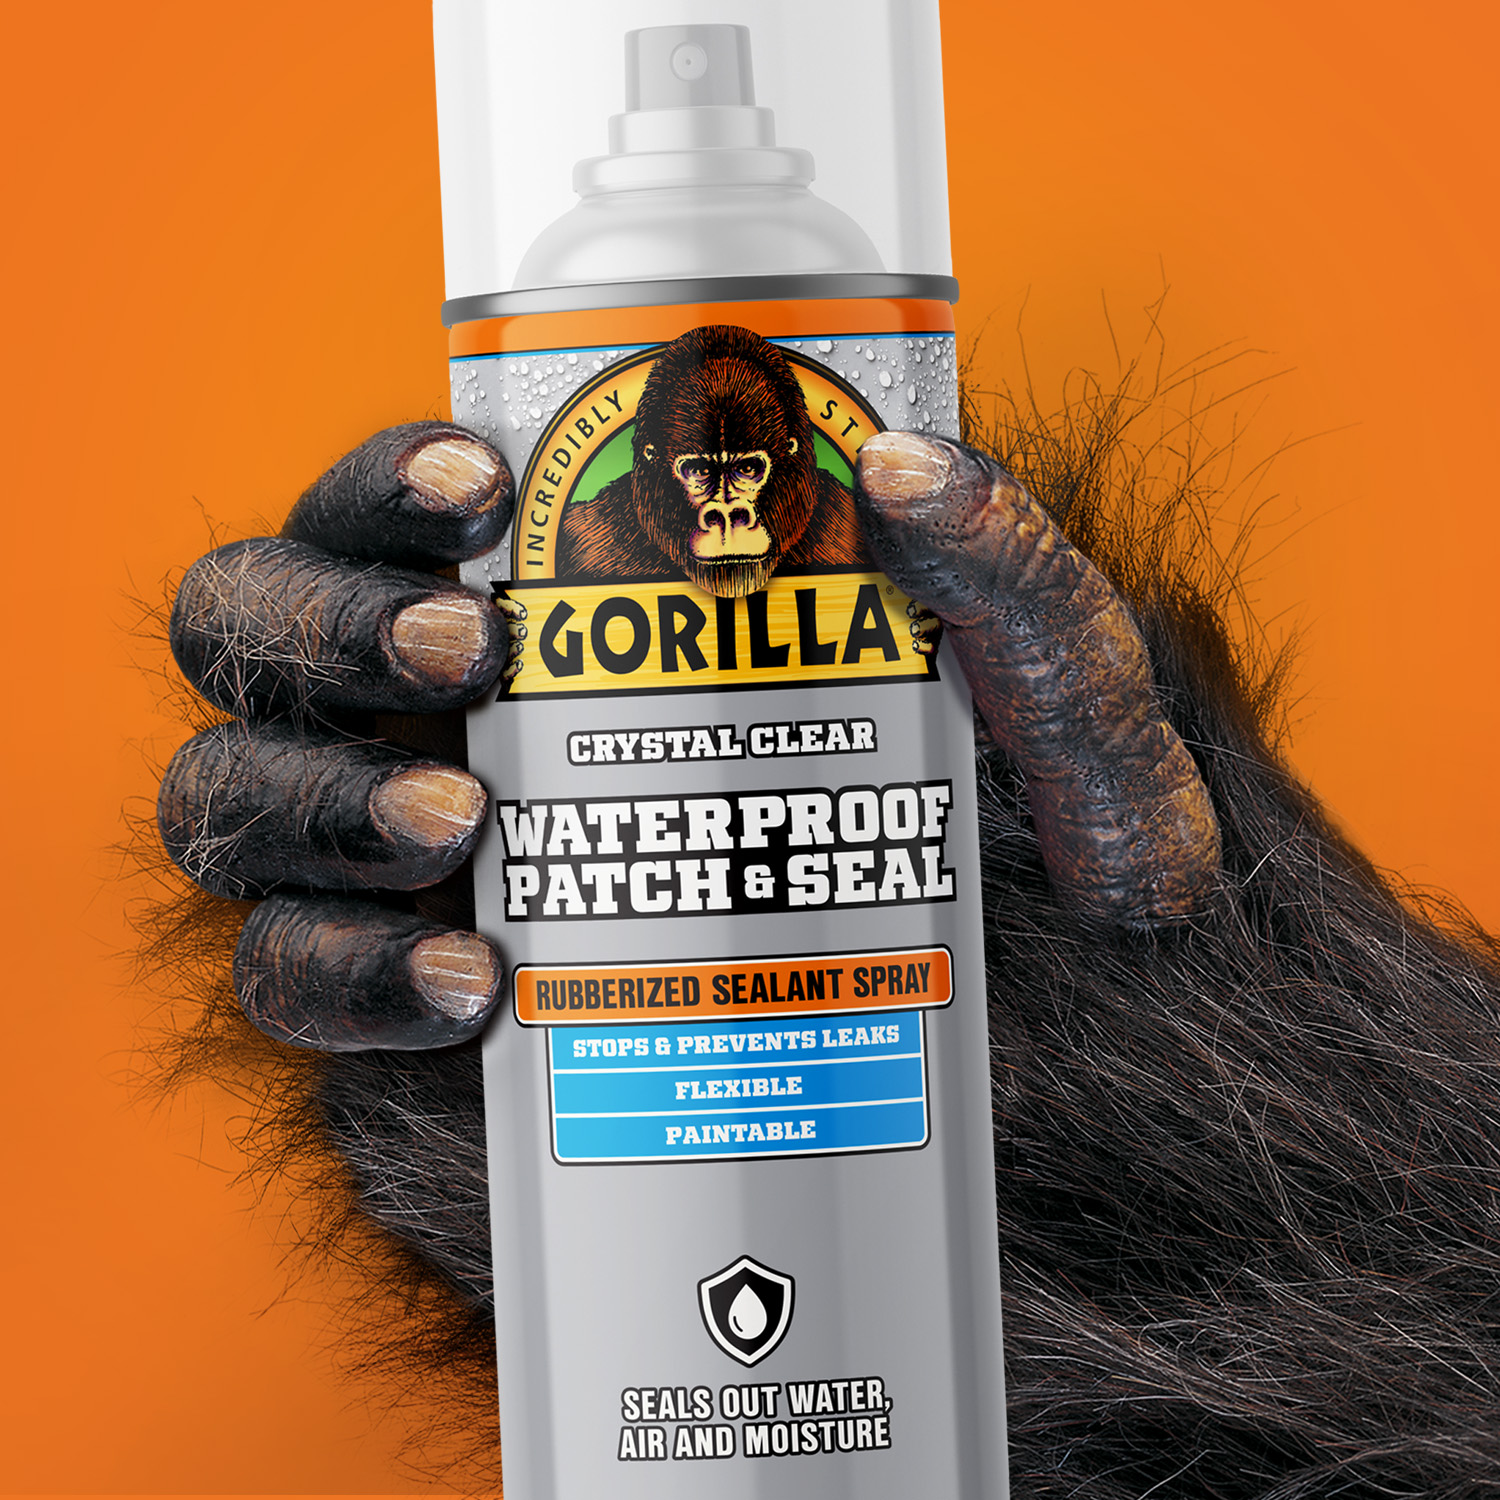 Gorilla Glue on X: Gorilla Waterproof Patch & Seal Spray is a flexible,  rubberized coating that seals out water, air and moisture. Once applied,  the self leveling formula smoothly covers small gaps